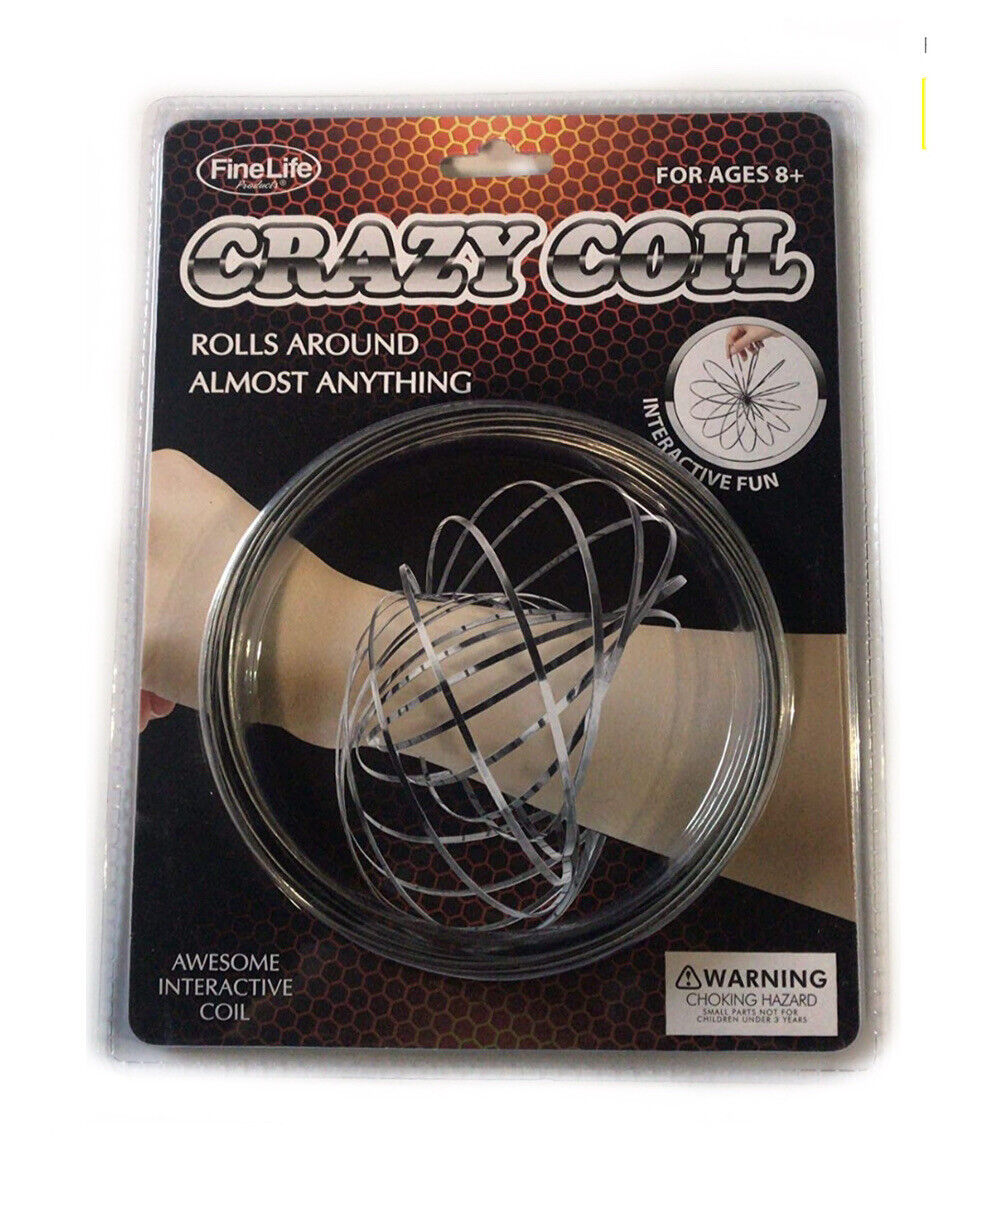 Crazy Coil Fidget Stress Beauty products Release Toy Max 81% OFF NEW FineLife Novelty